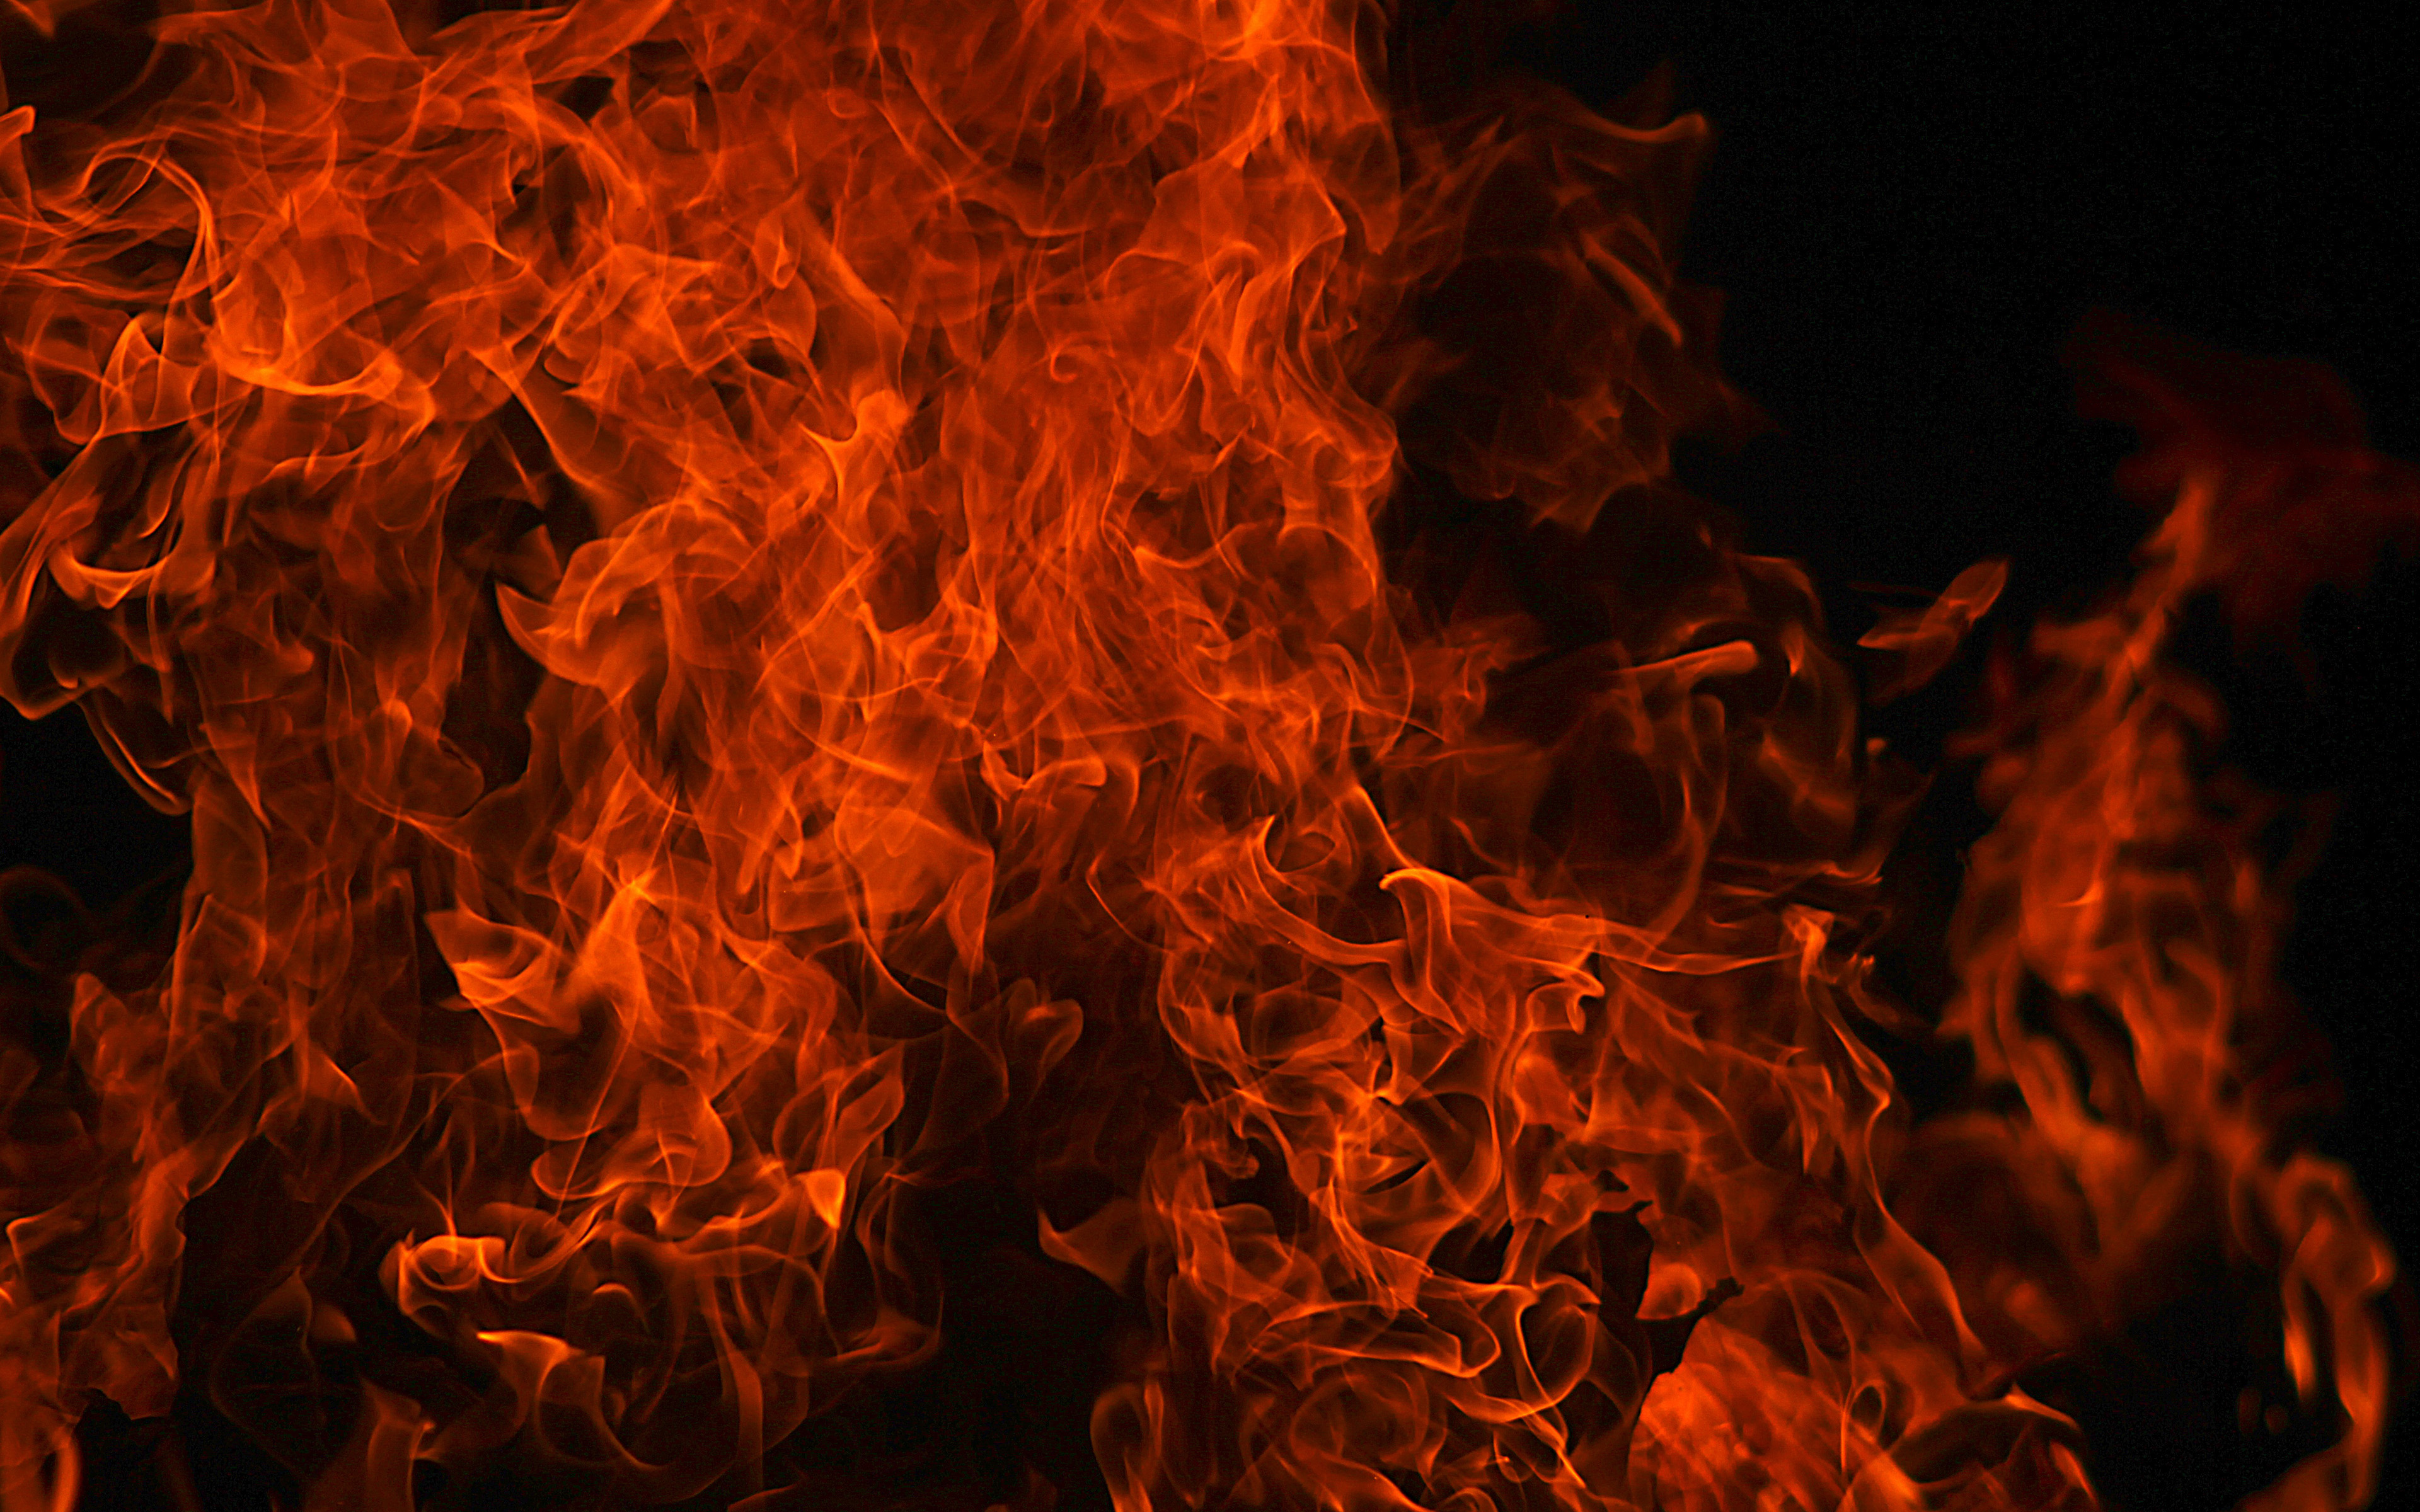 Download Wallpaper Fire Texture, 4k, Fire Flames, Close Up, Orange Fire, Black Background, Flame Texture For Desktop With Resolution 3840x2400. High Quality HD Picture Wallpaper